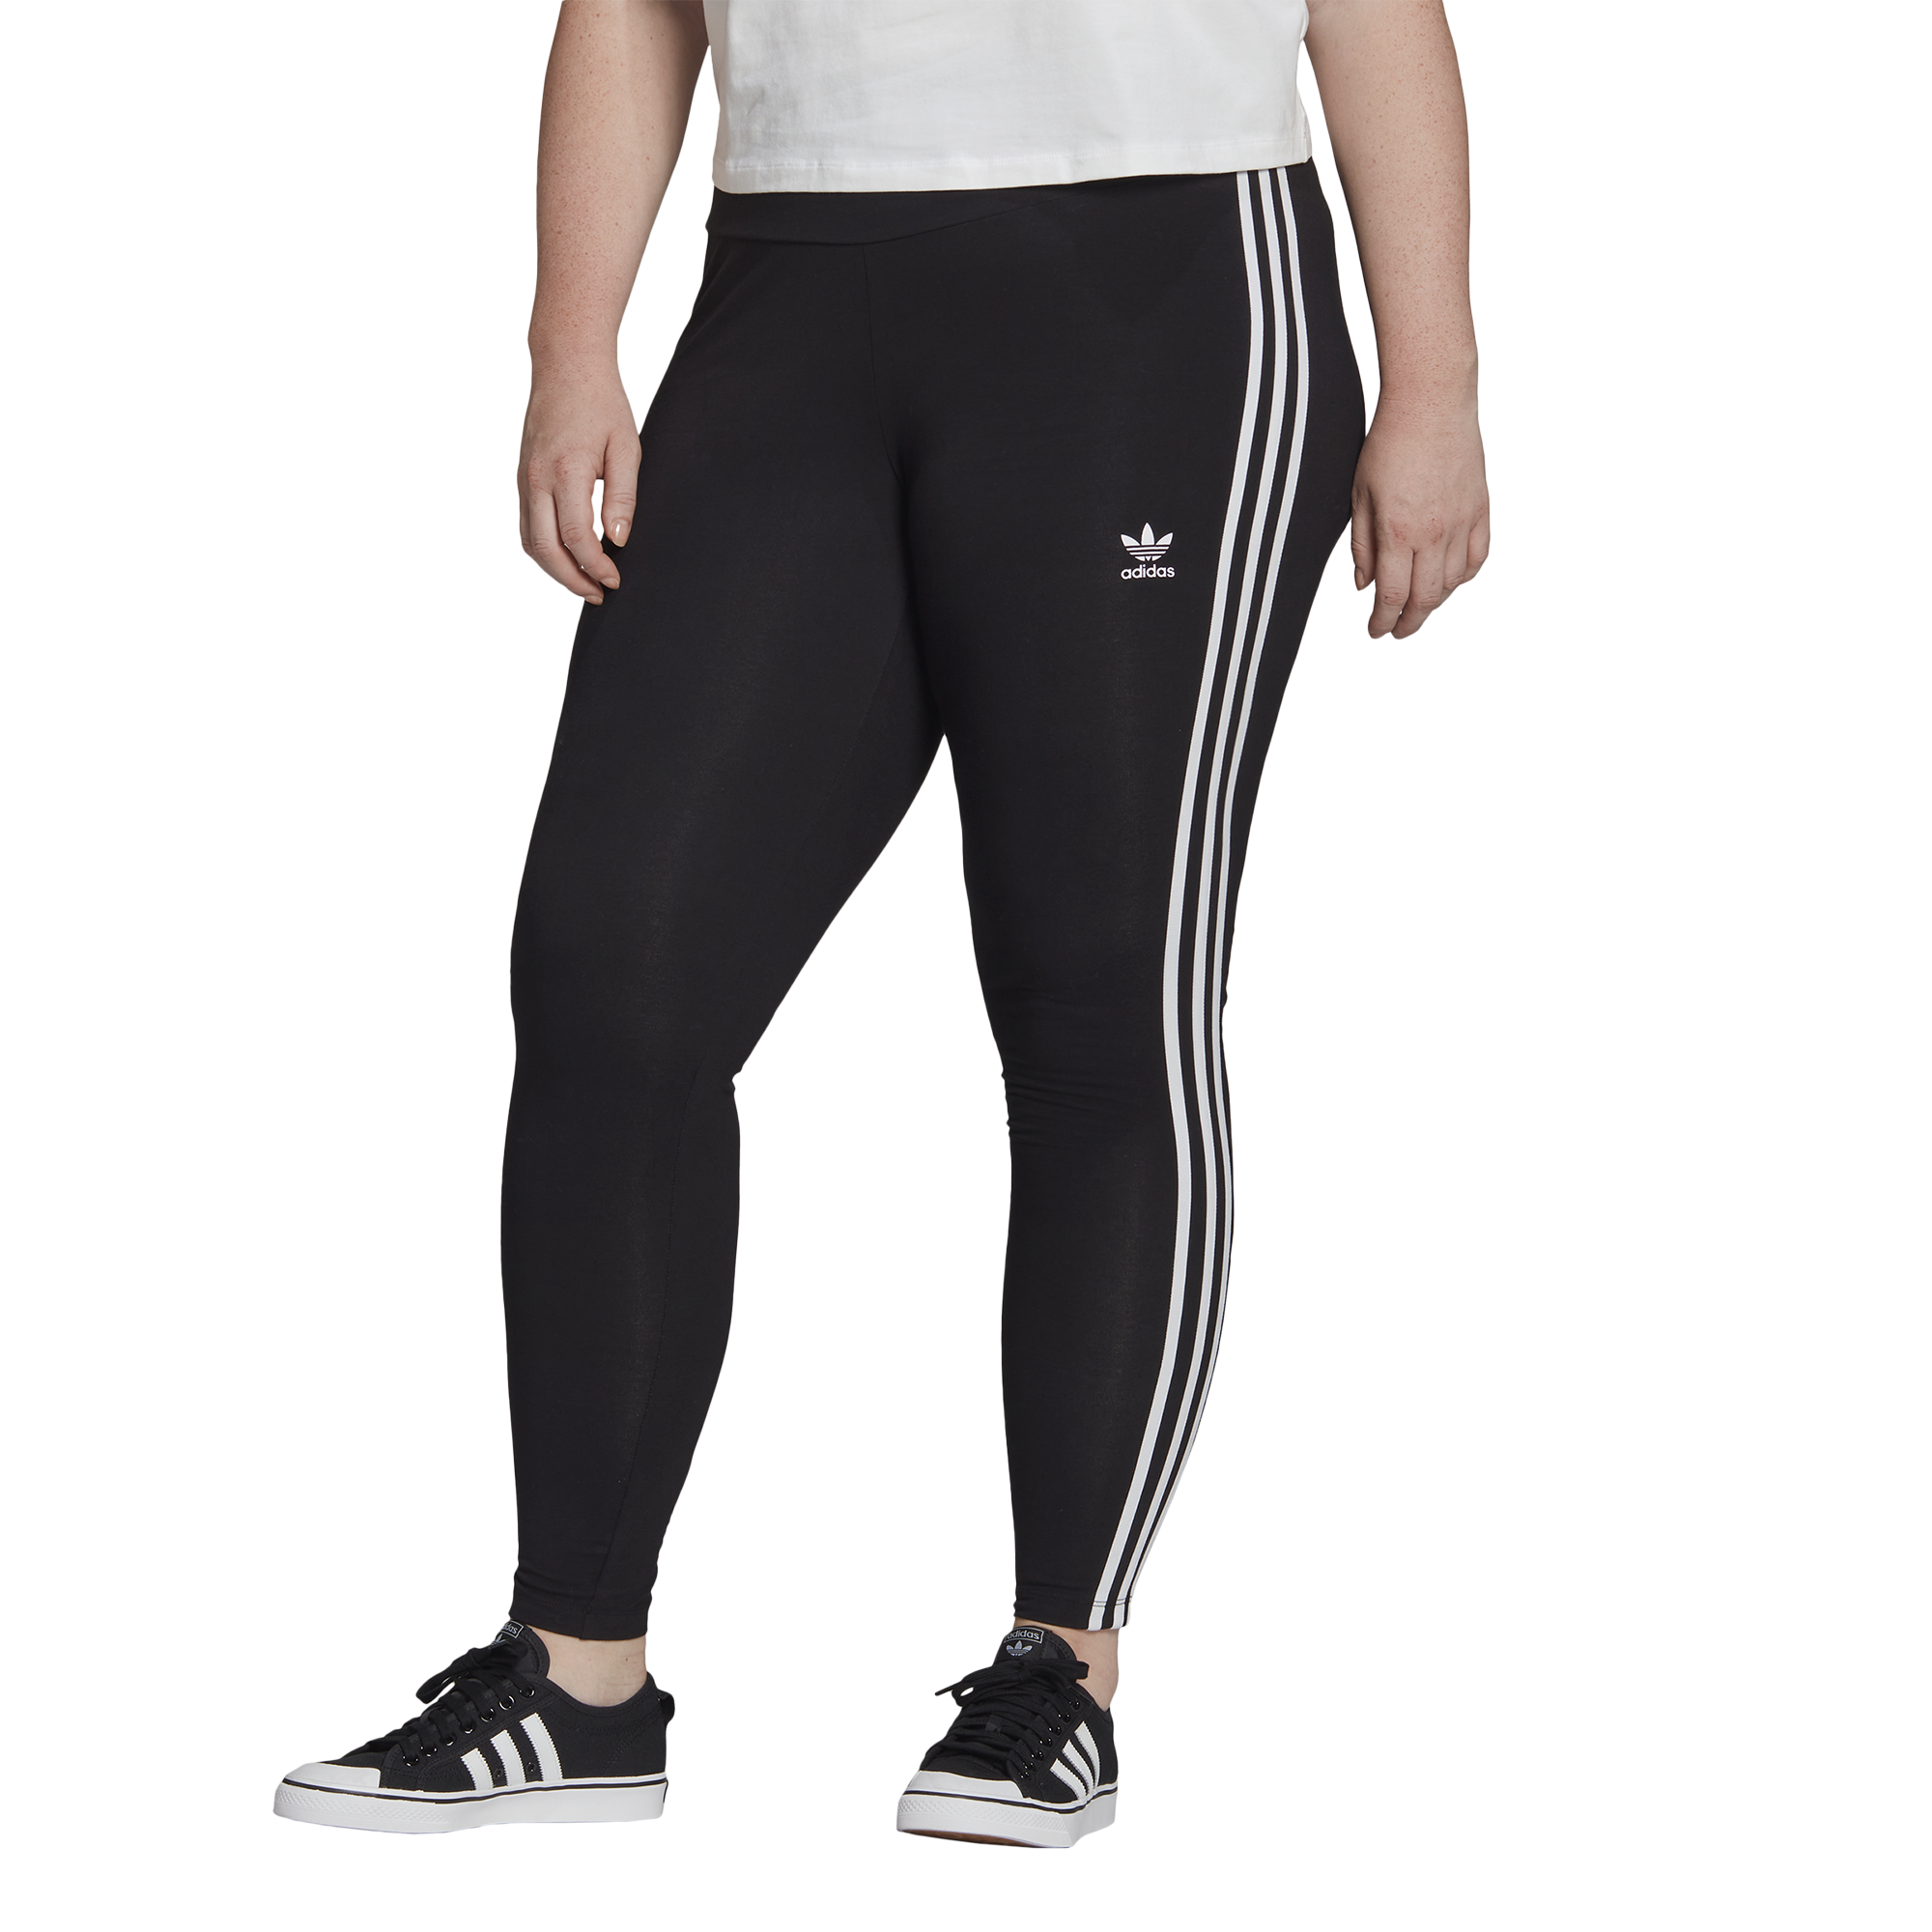 Adidas Originals Adicolor Classics 3-Stripes Tights (Plus Size) - Women's | The at Willow Bend